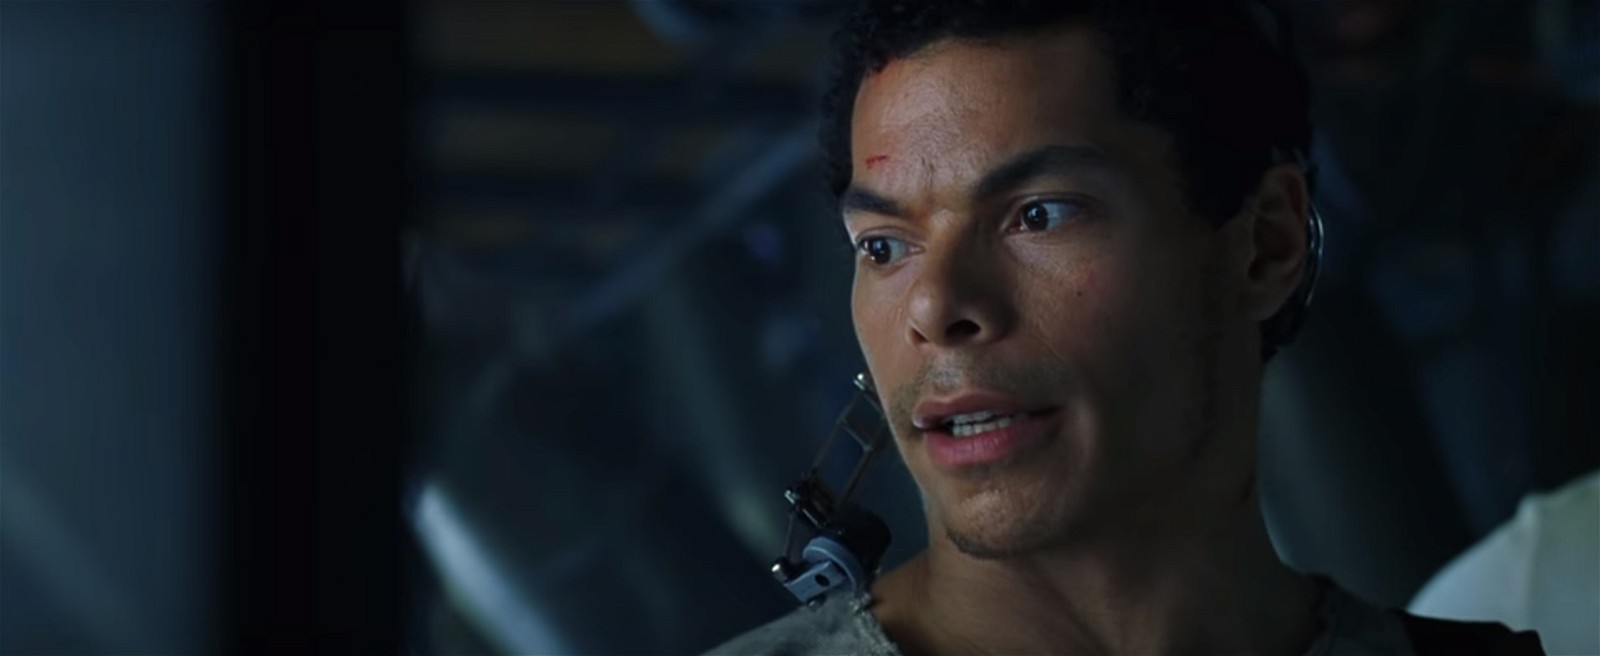 Marcus Chong portrayed the character of Tank in The Matrix (1999).